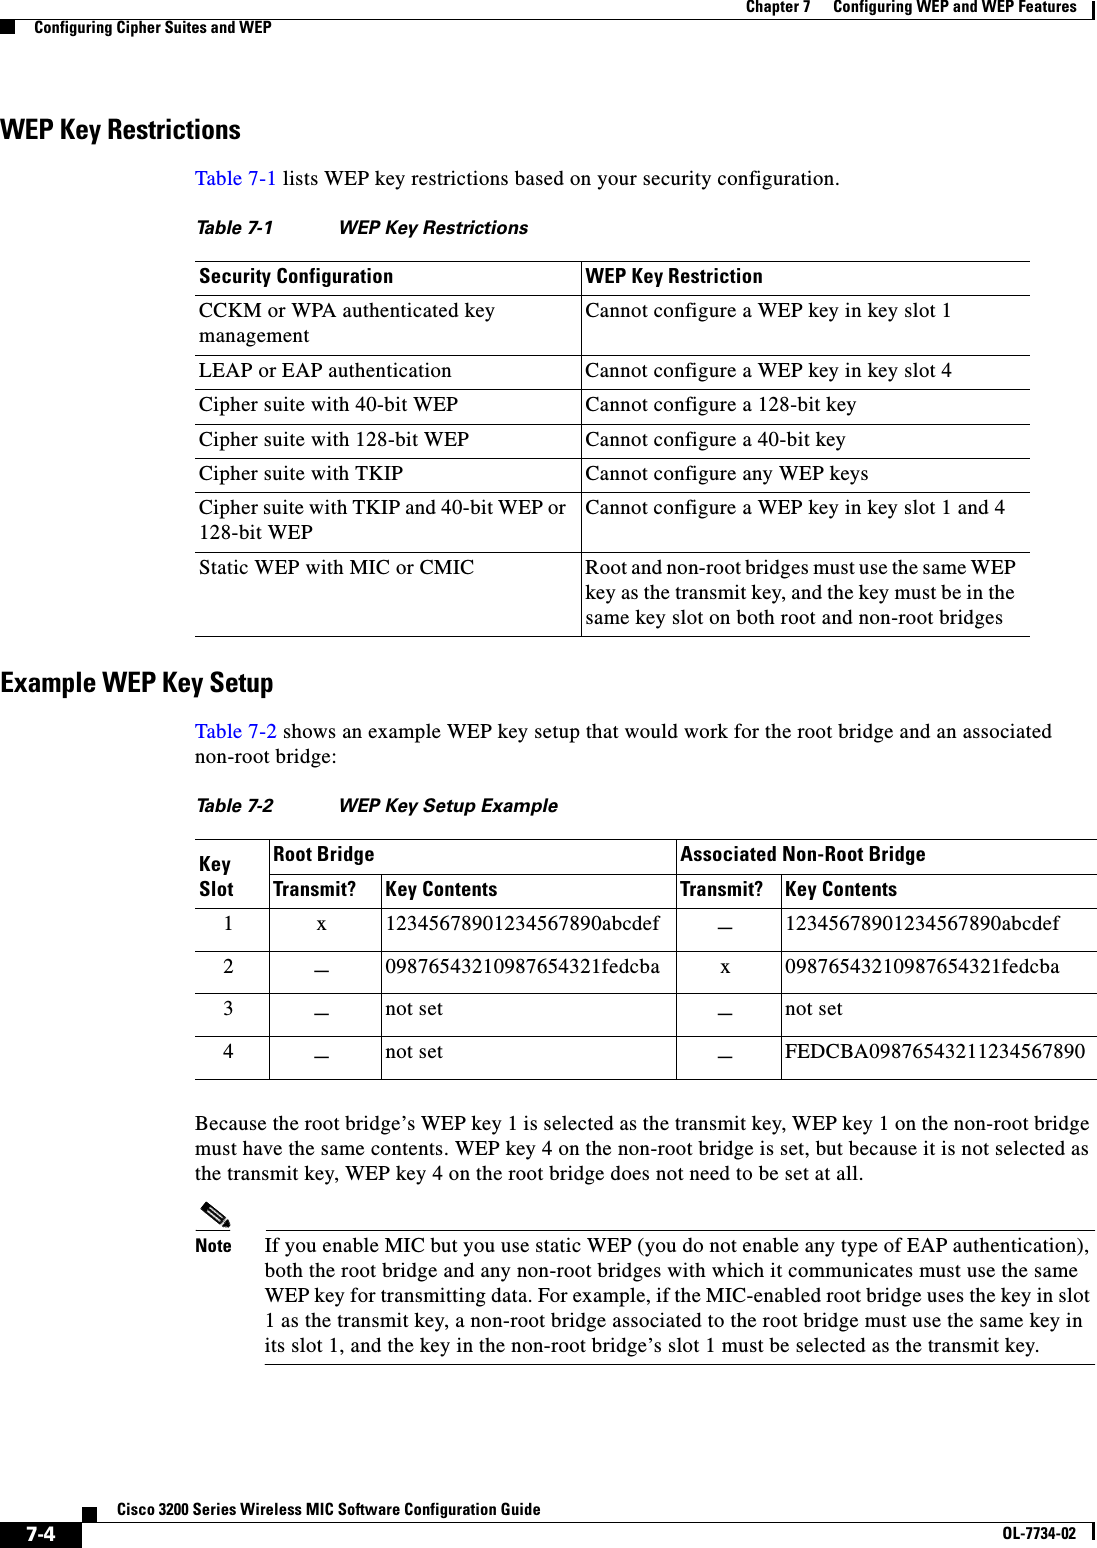 7-4Cisco 3200 Series Wireless MIC Software Configuration GuideOL-7734-02Chapter 7      Configuring WEP and WEP FeaturesConfiguring Cipher Suites and WEPWEP Key Restrictions Table 7-1 lists WEP key restrictions based on your security configuration.Example WEP Key SetupTable 7-2 shows an example WEP key setup that would work for the root bridge and an associated non-root bridge:Because the root bridge’s WEP key 1 is selected as the transmit key, WEP key 1 on the non-root bridge must have the same contents. WEP key 4 on the non-root bridge is set, but because it is not selected as the transmit key, WEP key 4 on the root bridge does not need to be set at all.Note If you enable MIC but you use static WEP (you do not enable any type of EAP authentication), both the root bridge and any non-root bridges with which it communicates must use the same WEP key for transmitting data. For example, if the MIC-enabled root bridge uses the key in slot 1 as the transmit key, a non-root bridge associated to the root bridge must use the same key in its slot 1, and the key in the non-root bridge’s slot 1 must be selected as the transmit key.Table 7-1 WEP Key RestrictionsSecurity Configuration WEP Key RestrictionCCKM or WPA authenticated key managementCannot configure a WEP key in key slot 1LEAP or EAP authentication Cannot configure a WEP key in key slot 4Cipher suite with 40-bit WEP Cannot configure a 128-bit keyCipher suite with 128-bit WEP Cannot configure a 40-bit keyCipher suite with TKIP Cannot configure any WEP keysCipher suite with TKIP and 40-bit WEP or 128-bit WEPCannot configure a WEP key in key slot 1 and 4Static WEP with MIC or CMIC Root and non-root bridges must use the same WEP key as the transmit key, and the key must be in the same key slot on both root and non-root bridgesTable 7-2 WEP Key Setup Example KeySlotRoot Bridge Associated Non-Root BridgeTransmit? Key Contents Transmit? Key Contents1 x 12345678901234567890abcdef –12345678901234567890abcdef2–09876543210987654321fedcba x 09876543210987654321fedcba3–not set –not set4–not set –FEDCBA09876543211234567890